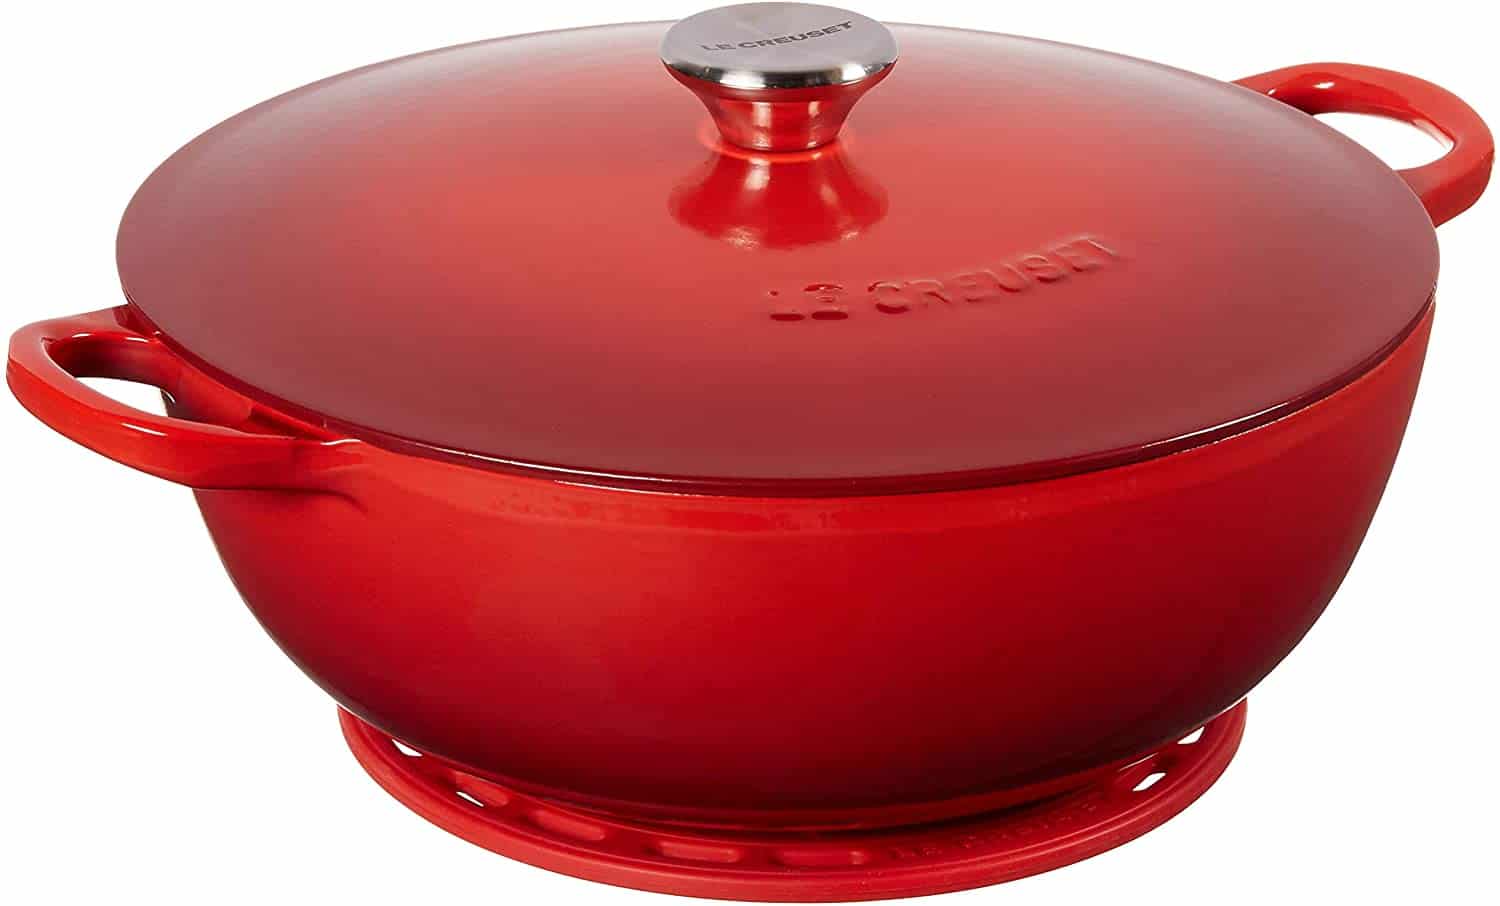 40% off Kitchen Essentials, including this red baking pot.